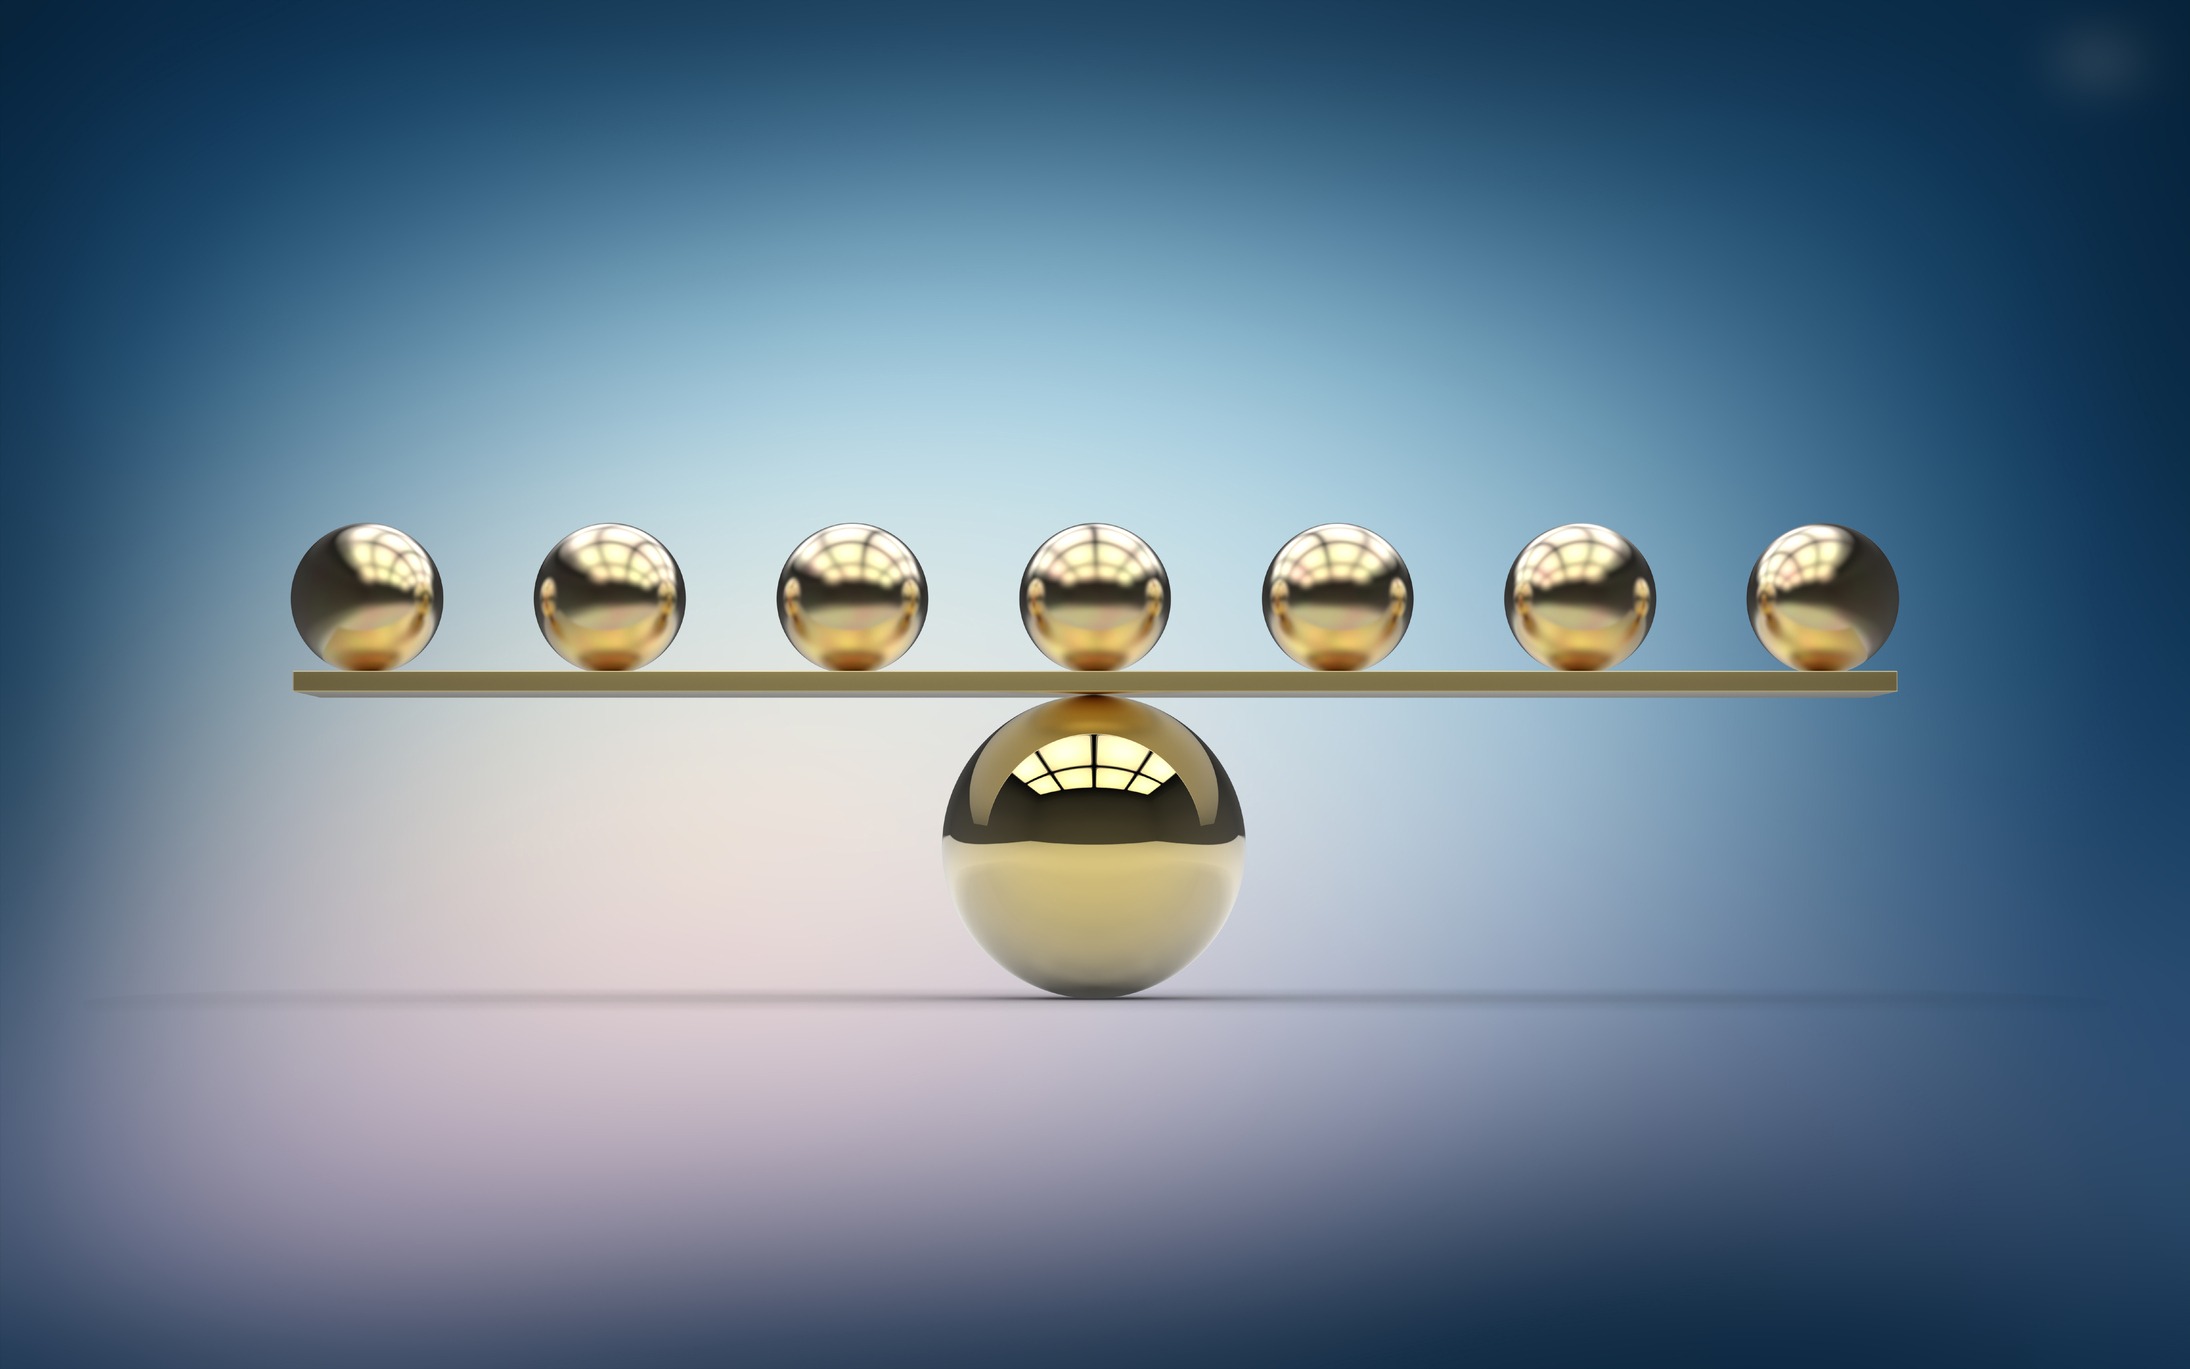 Seven small gold metallic balls balancing on one large gold ball. Imbalance. Weight scale.